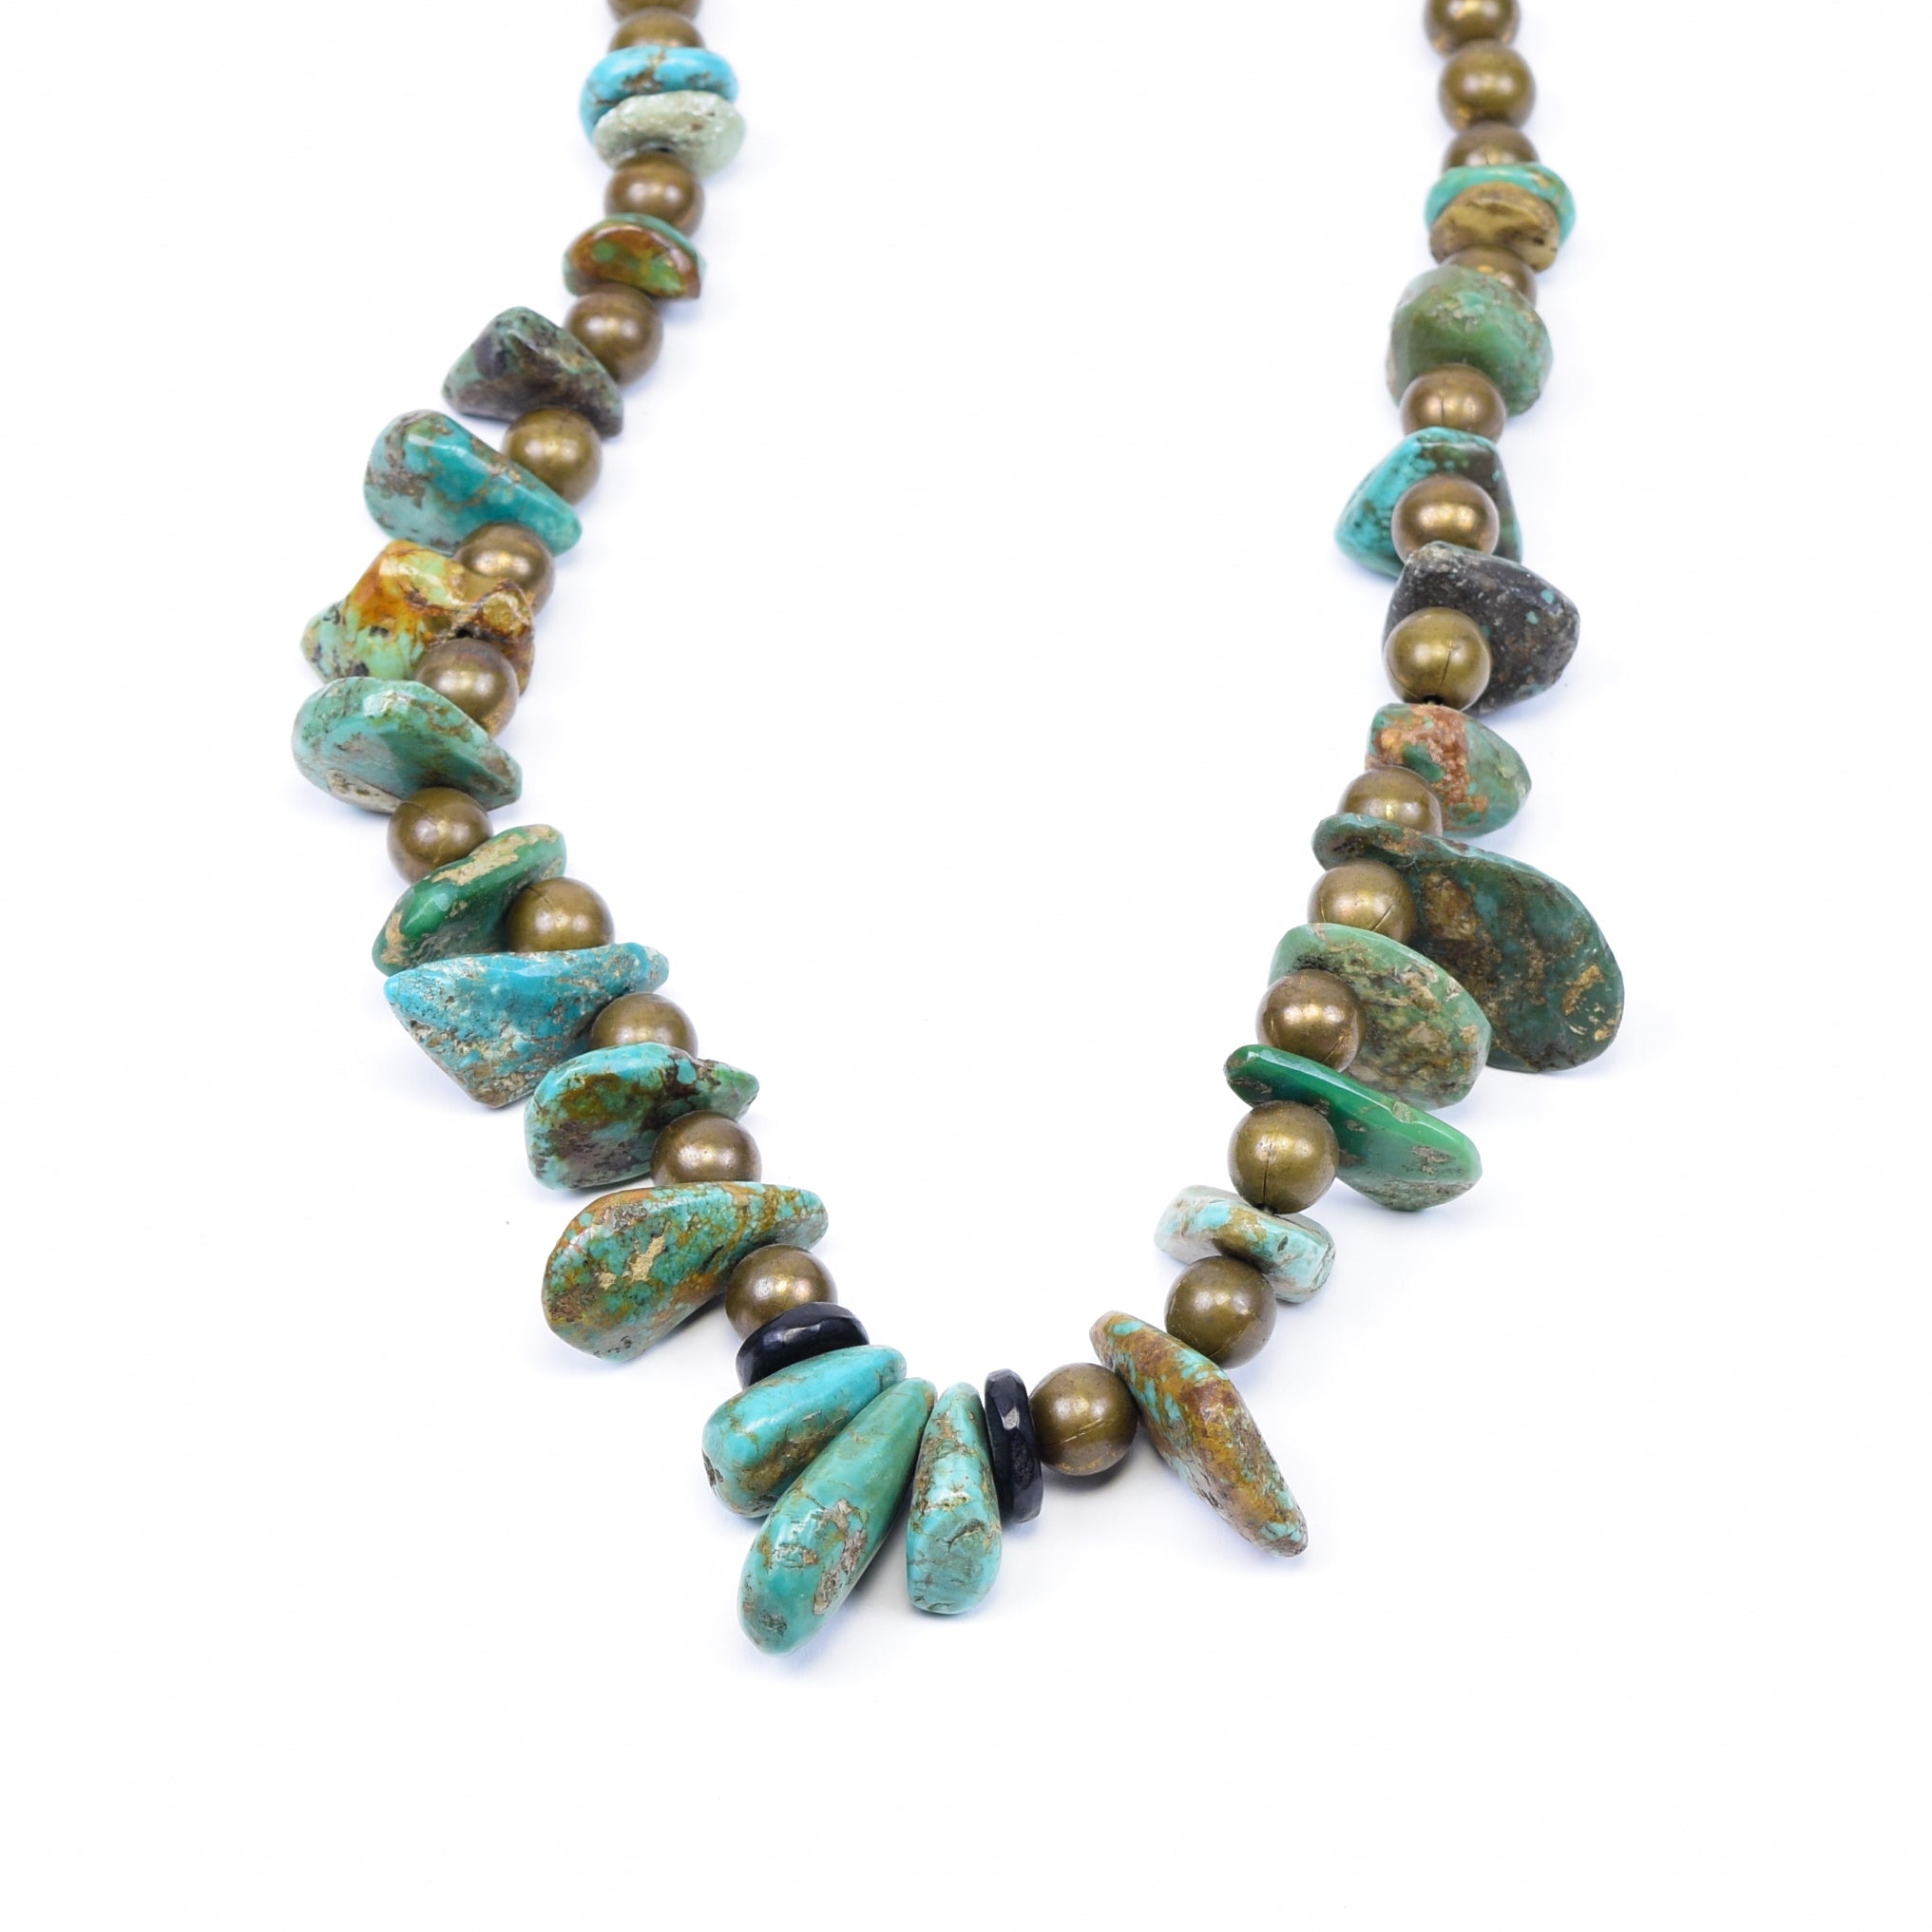 Old Navajo Turquoise Necklace